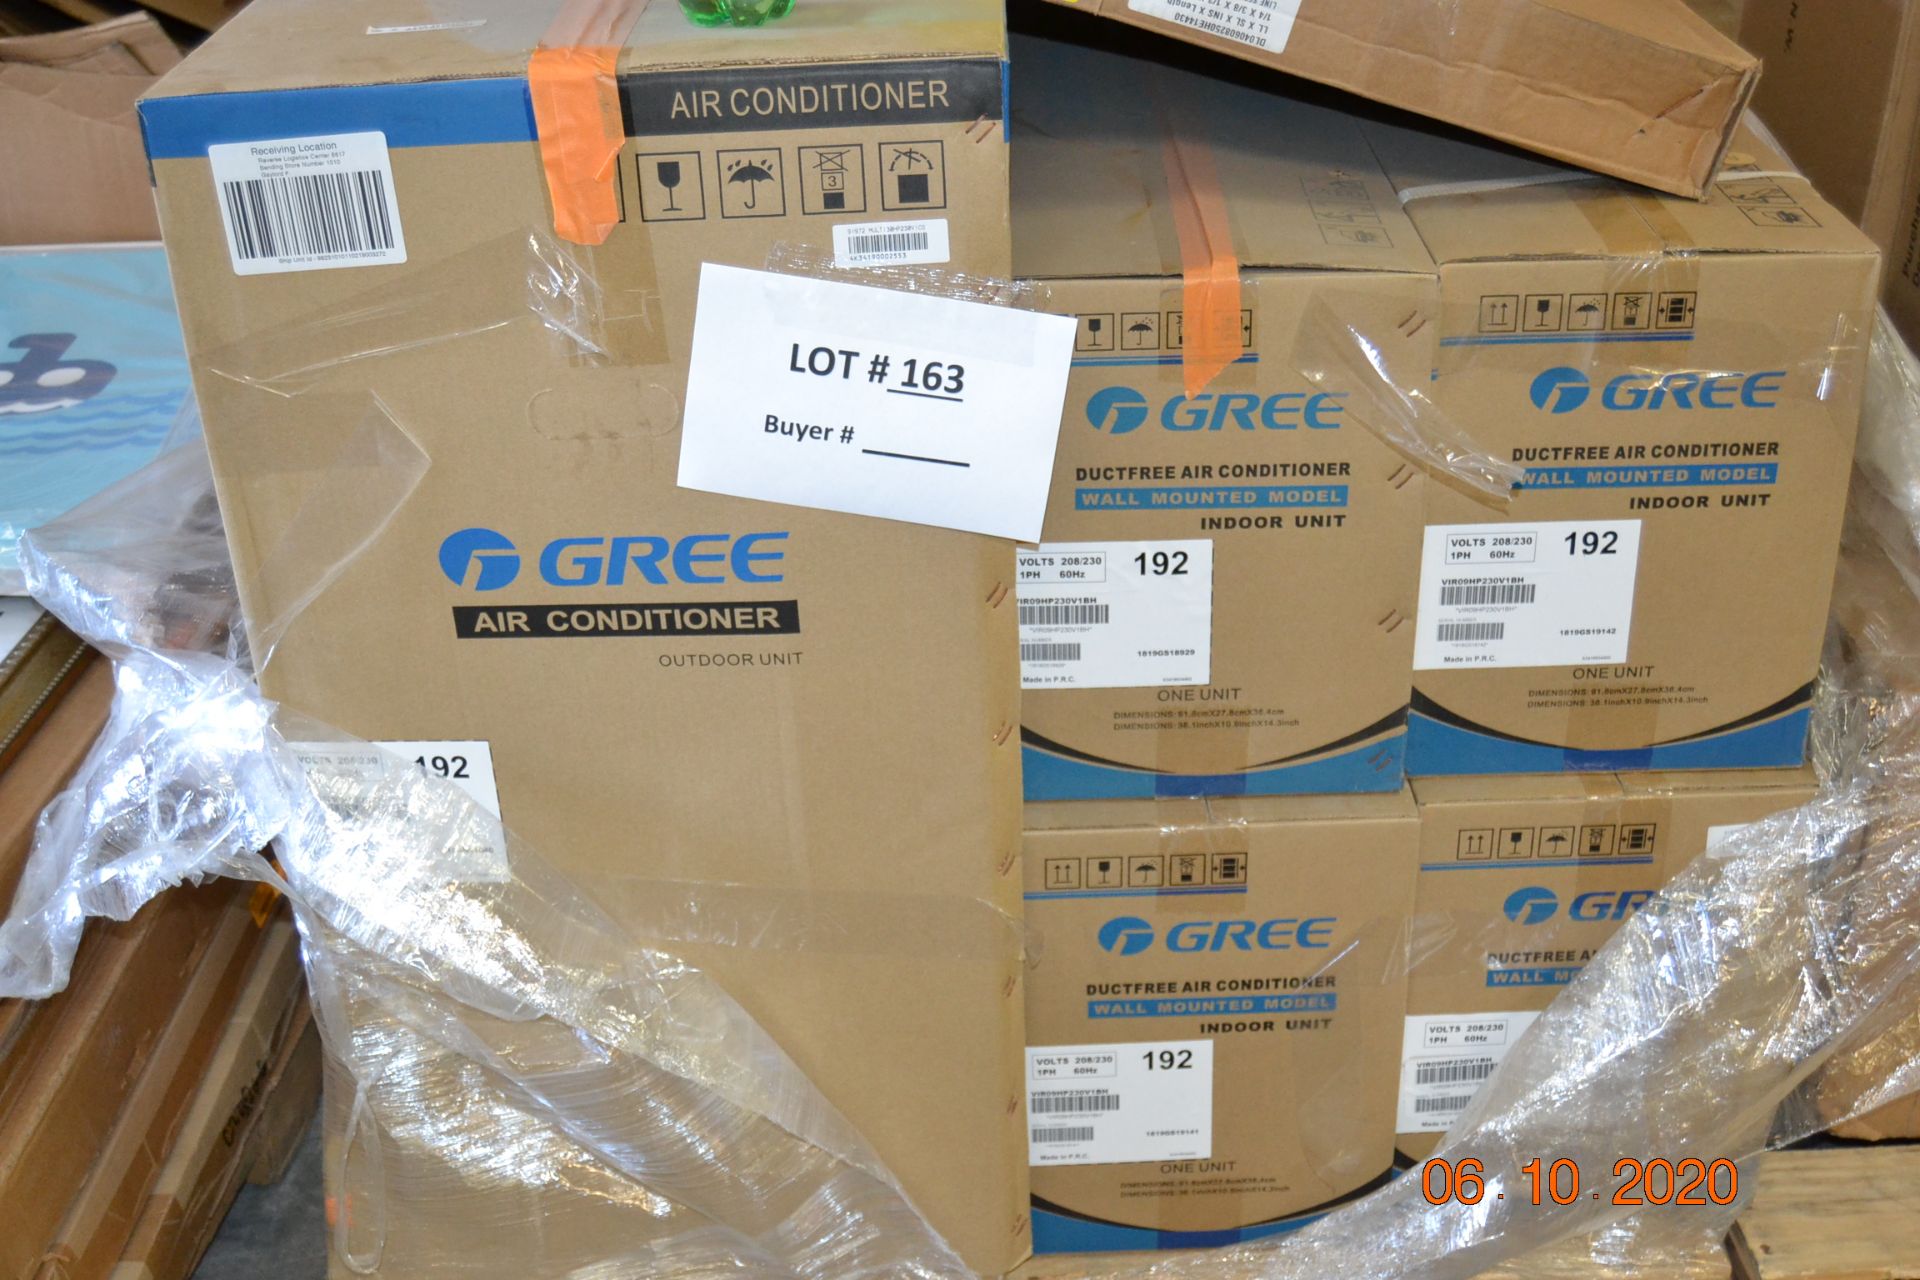 GREE AIR CONDITIONER WITH 4 HEADS & HOSE KIT